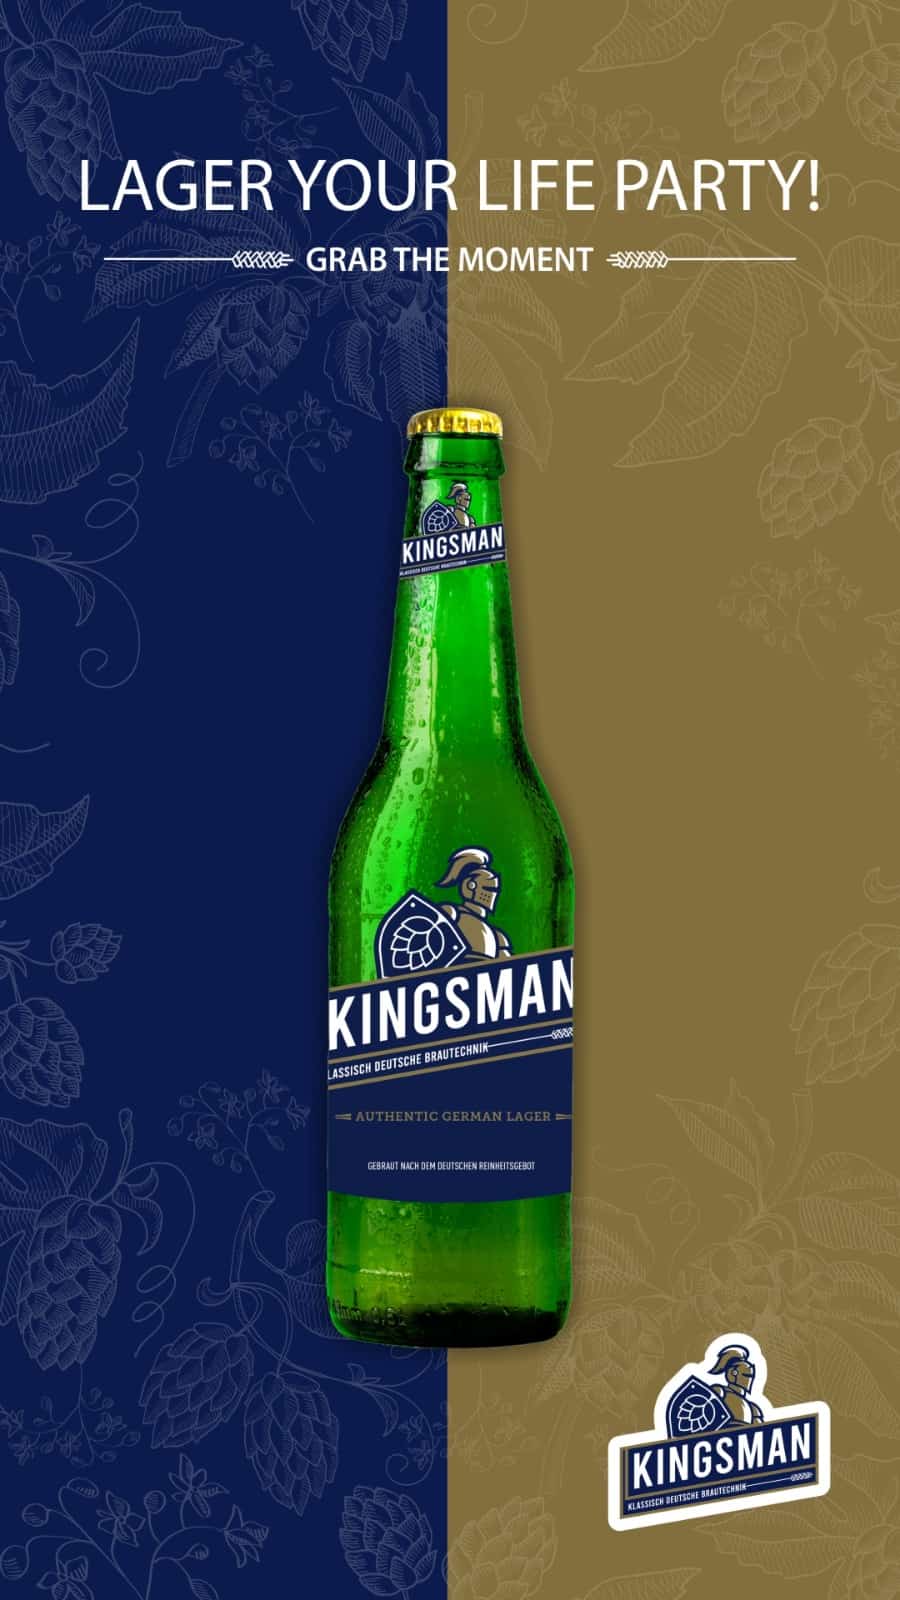 Kingsman Beer German Lager of Your Life Party